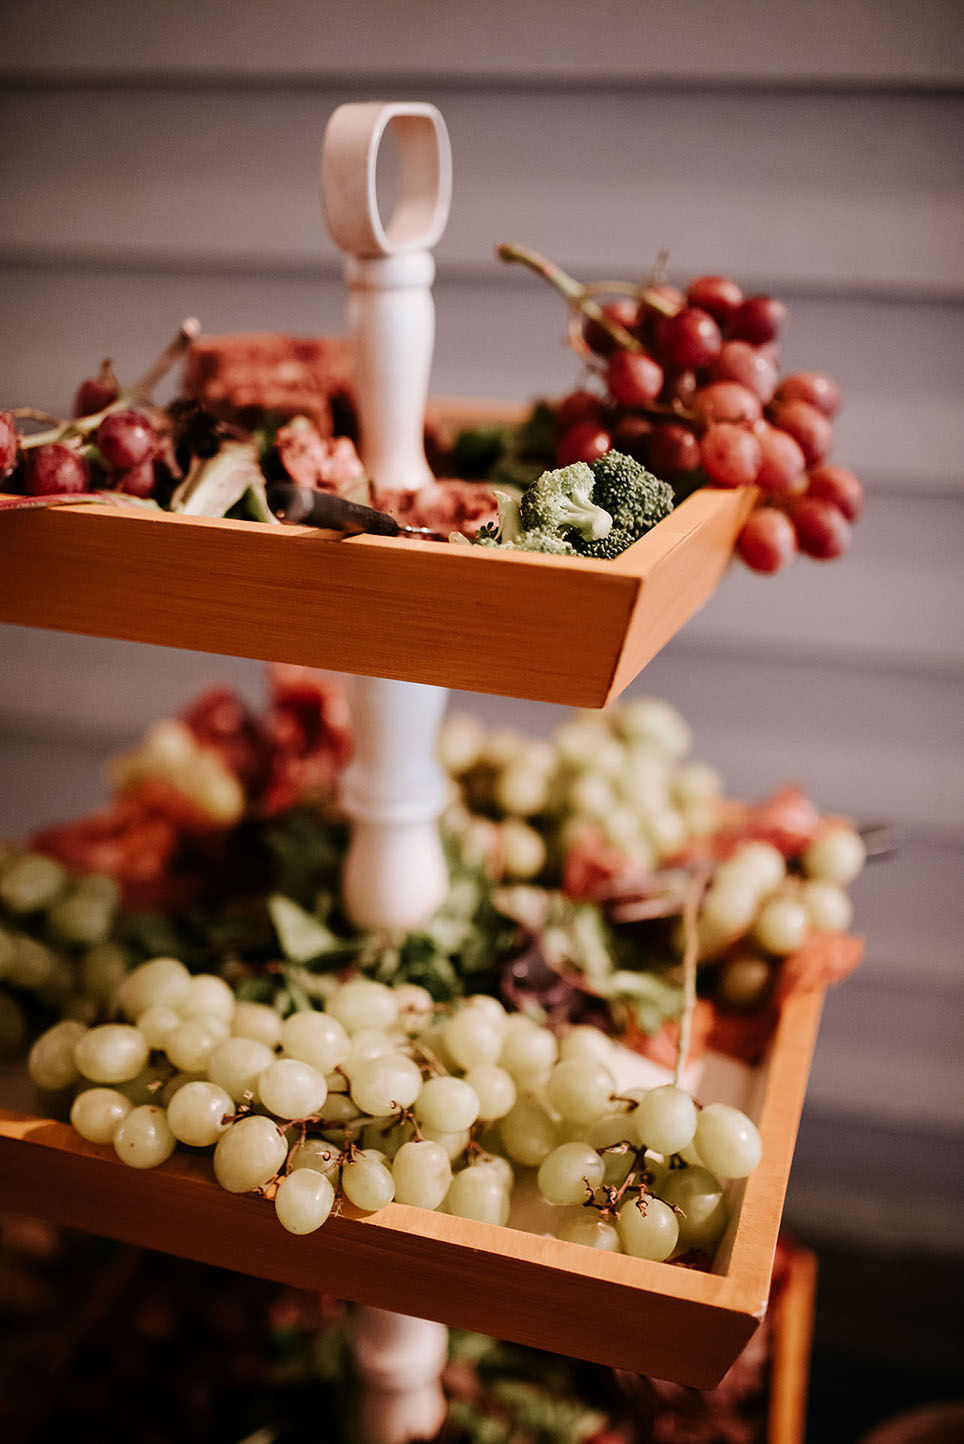 Grapes on Charcuterie Display